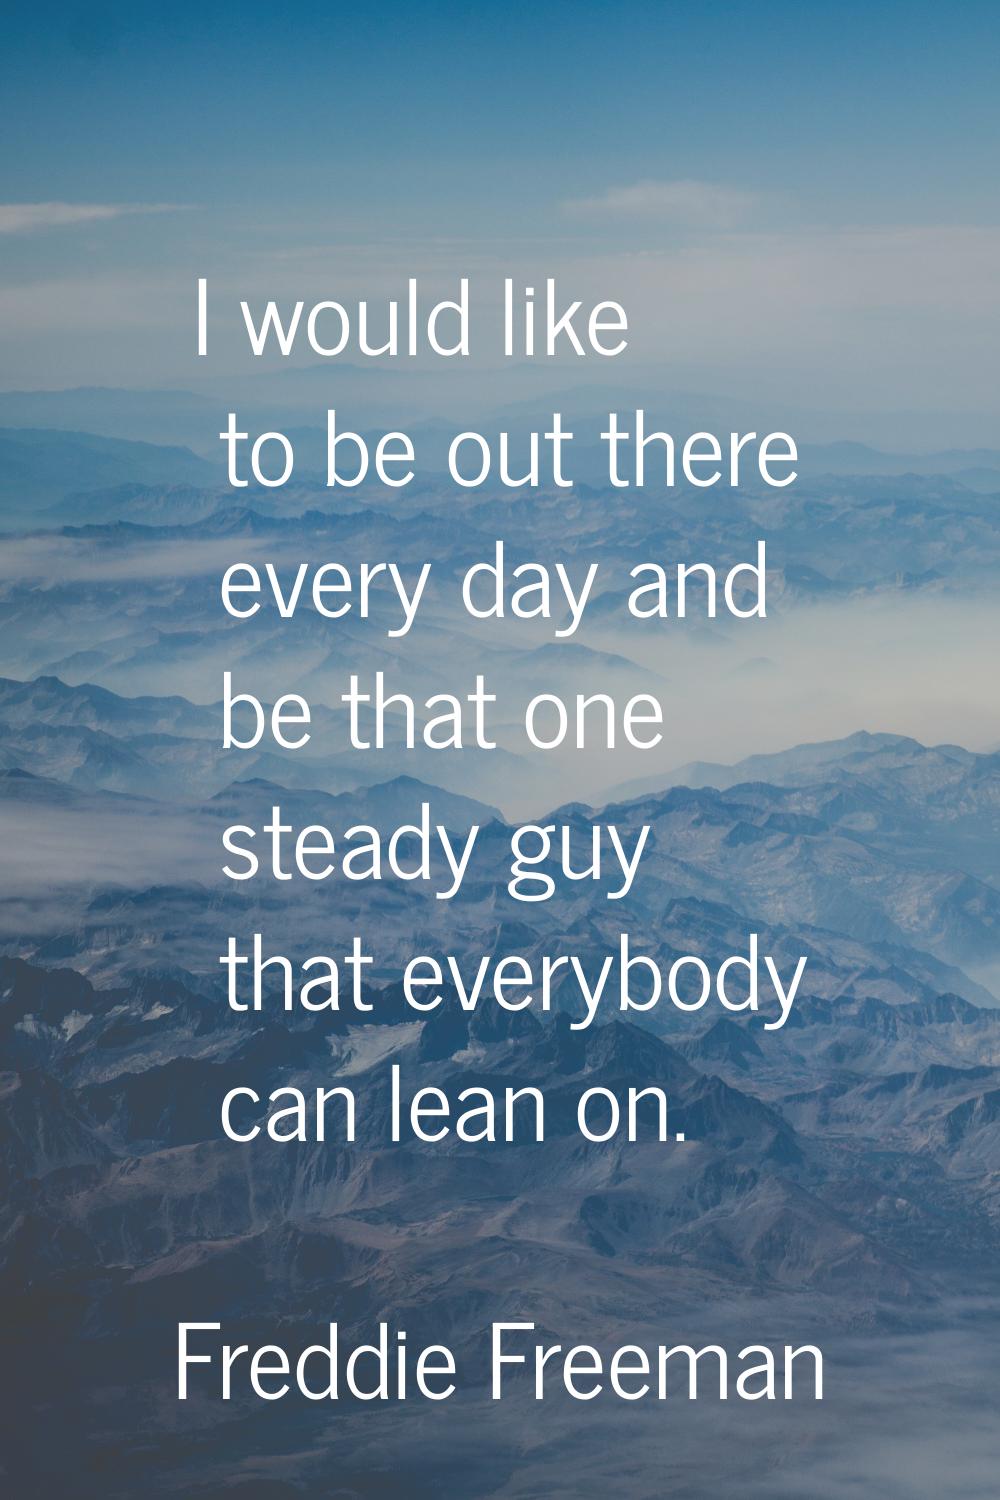 I would like to be out there every day and be that one steady guy that everybody can lean on.